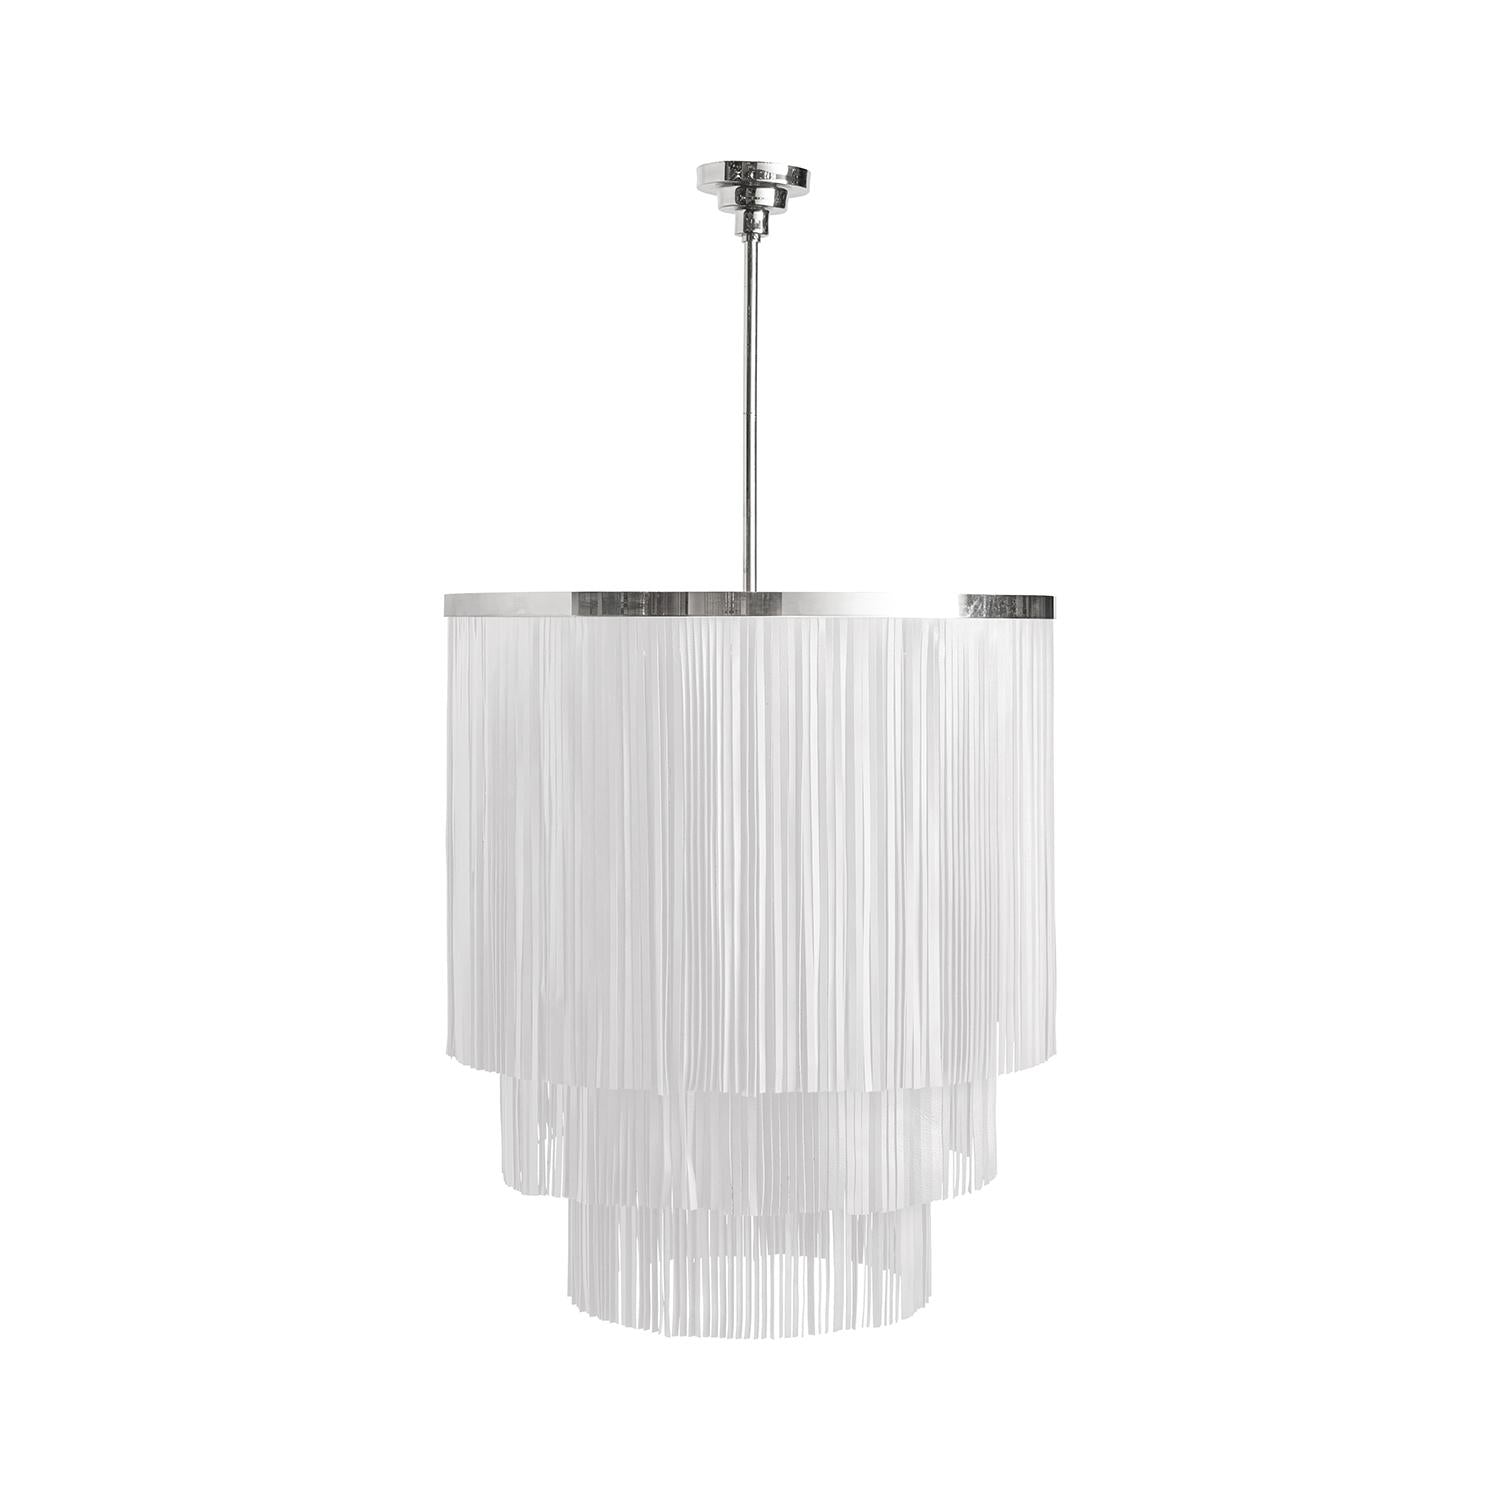 Small NeKeia Leather Chandelier in Nickel Finish and Premium Leather